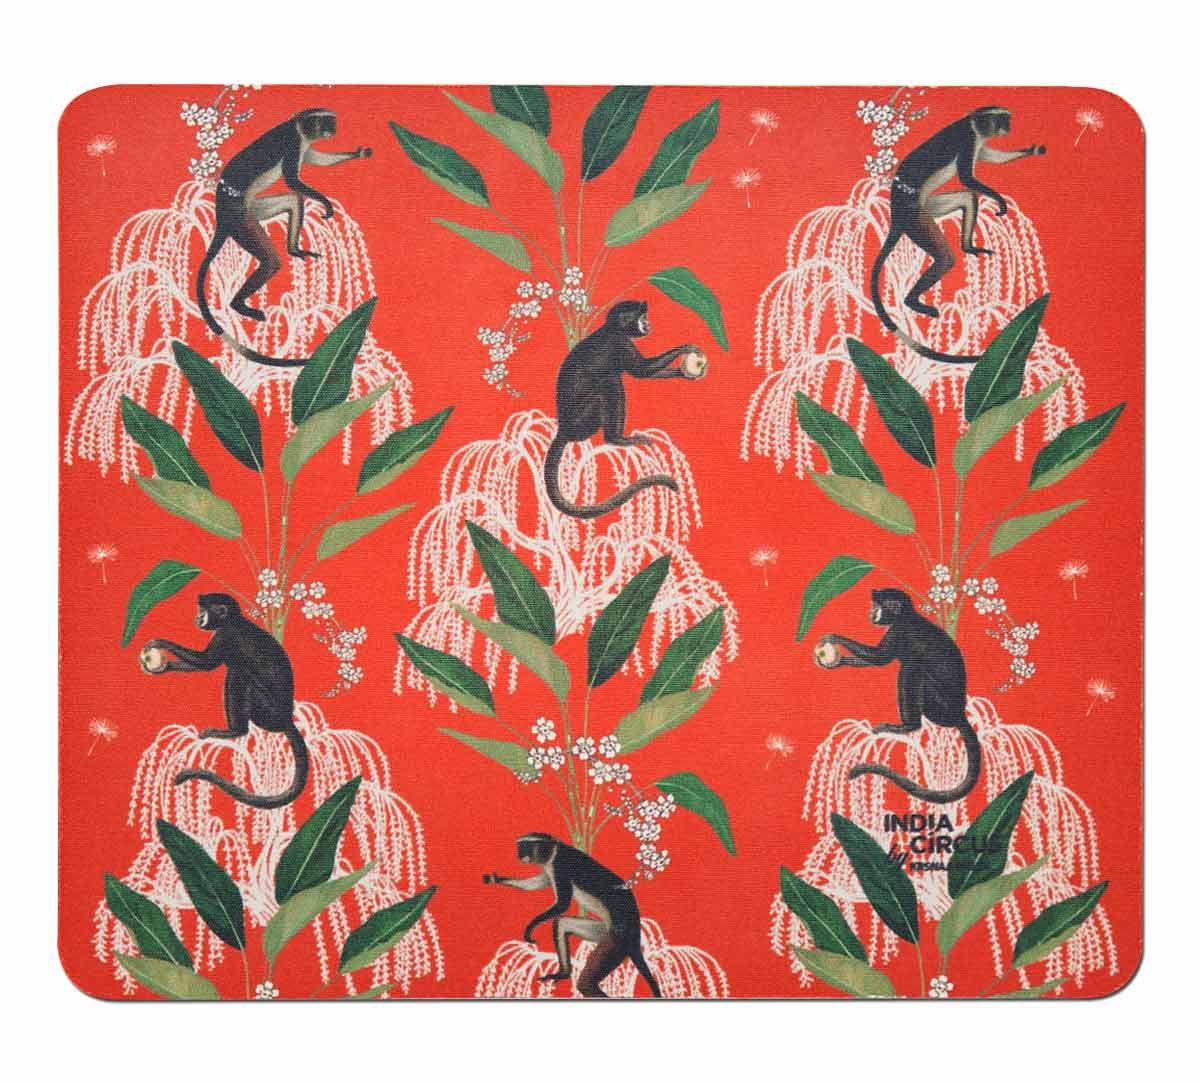 India Circus Monkey Games Mouse Pad